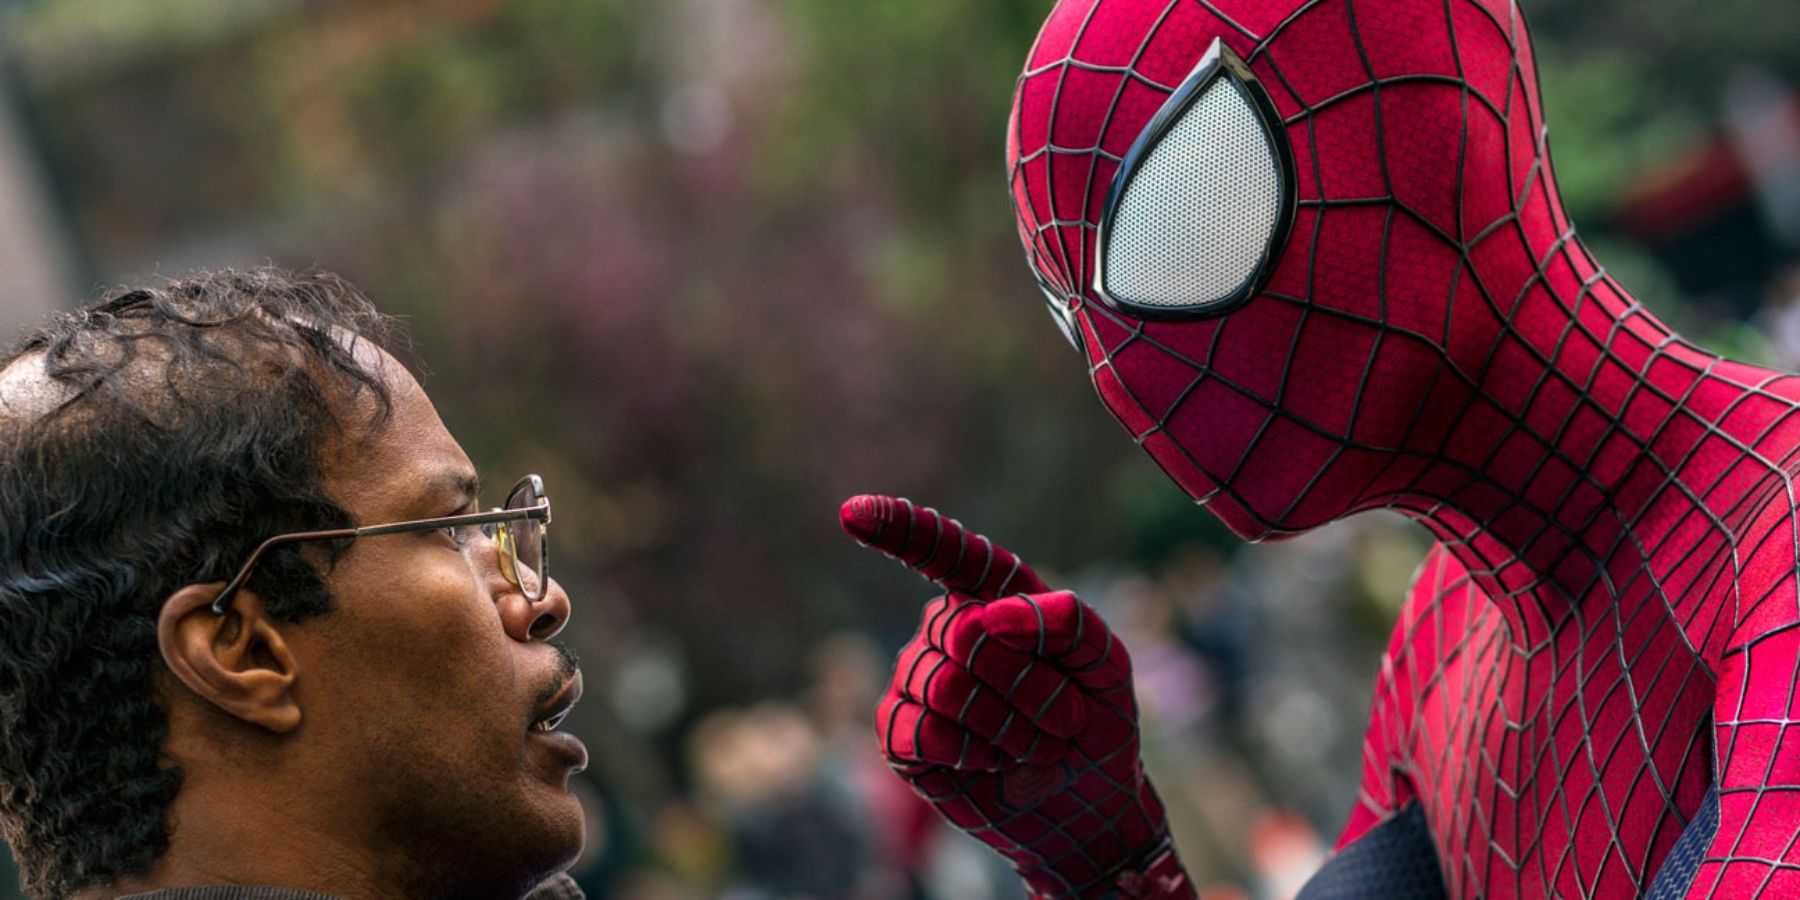 Jaime Foxx and Andrew Garfield in The Amazing Spider-Man 2